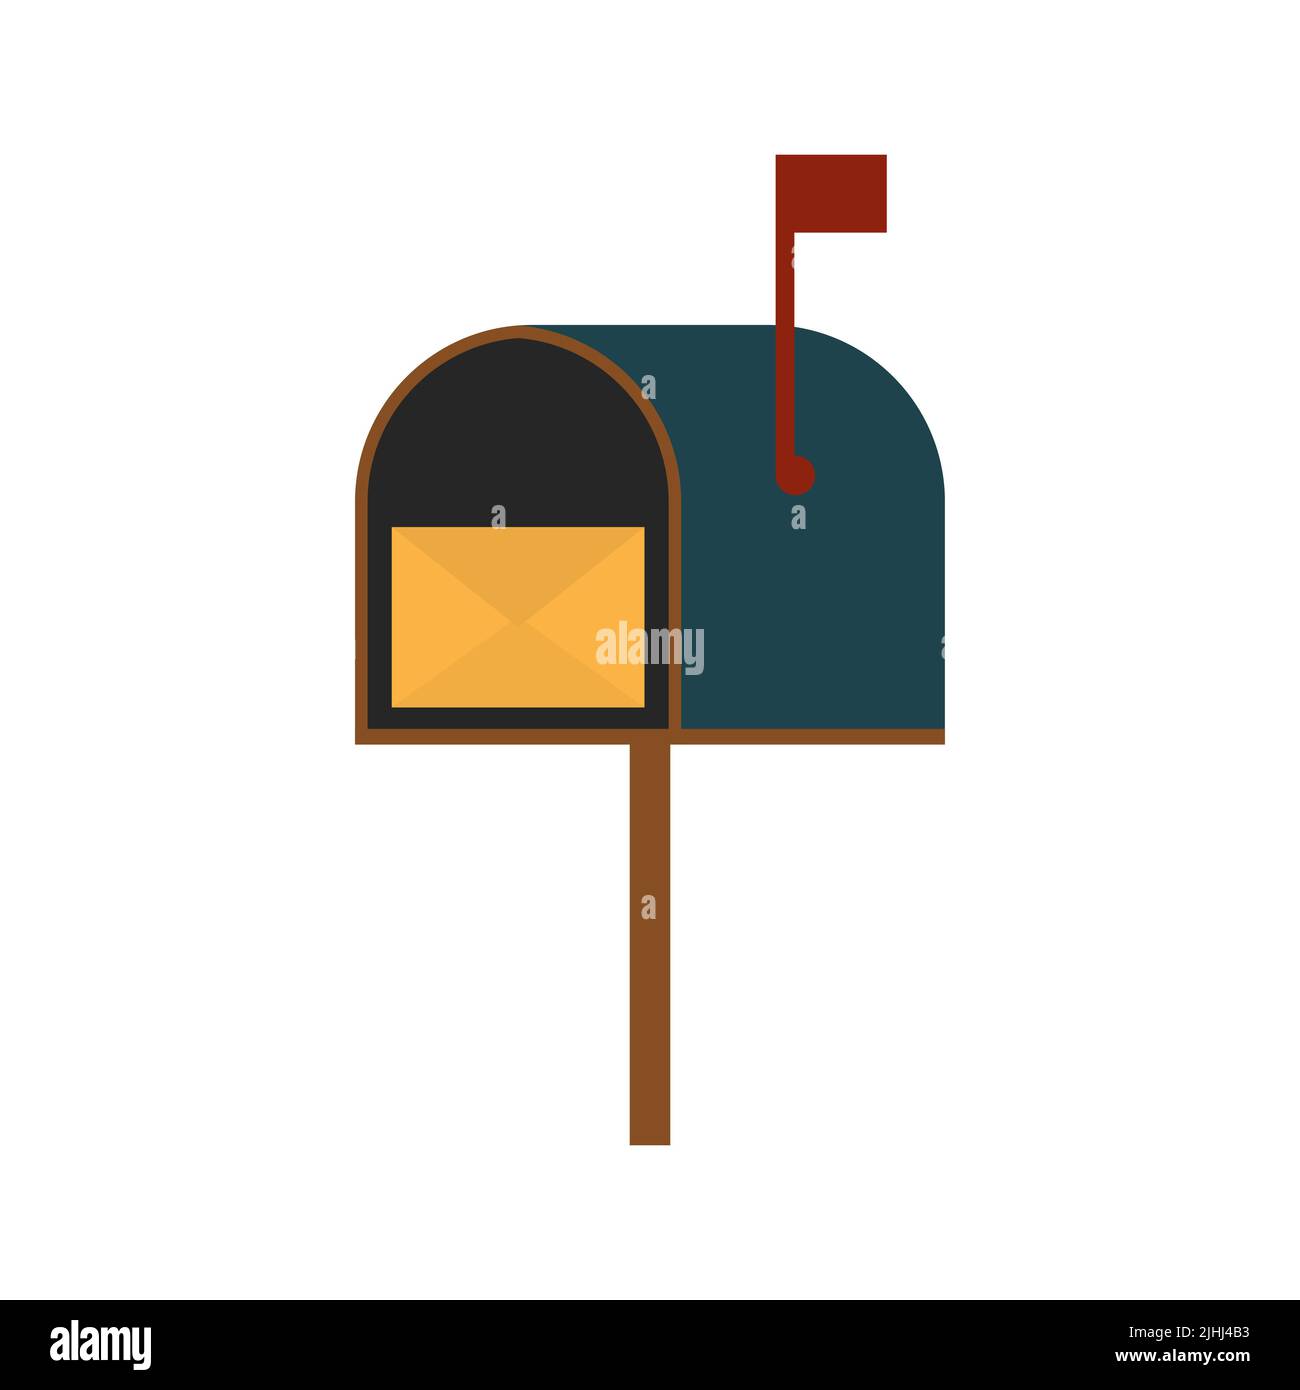 https://c8.alamy.com/comp/2JHJ4B3/mailbox-with-letter-inside-isolated-on-white-background-vector-illustration-2JHJ4B3.jpg